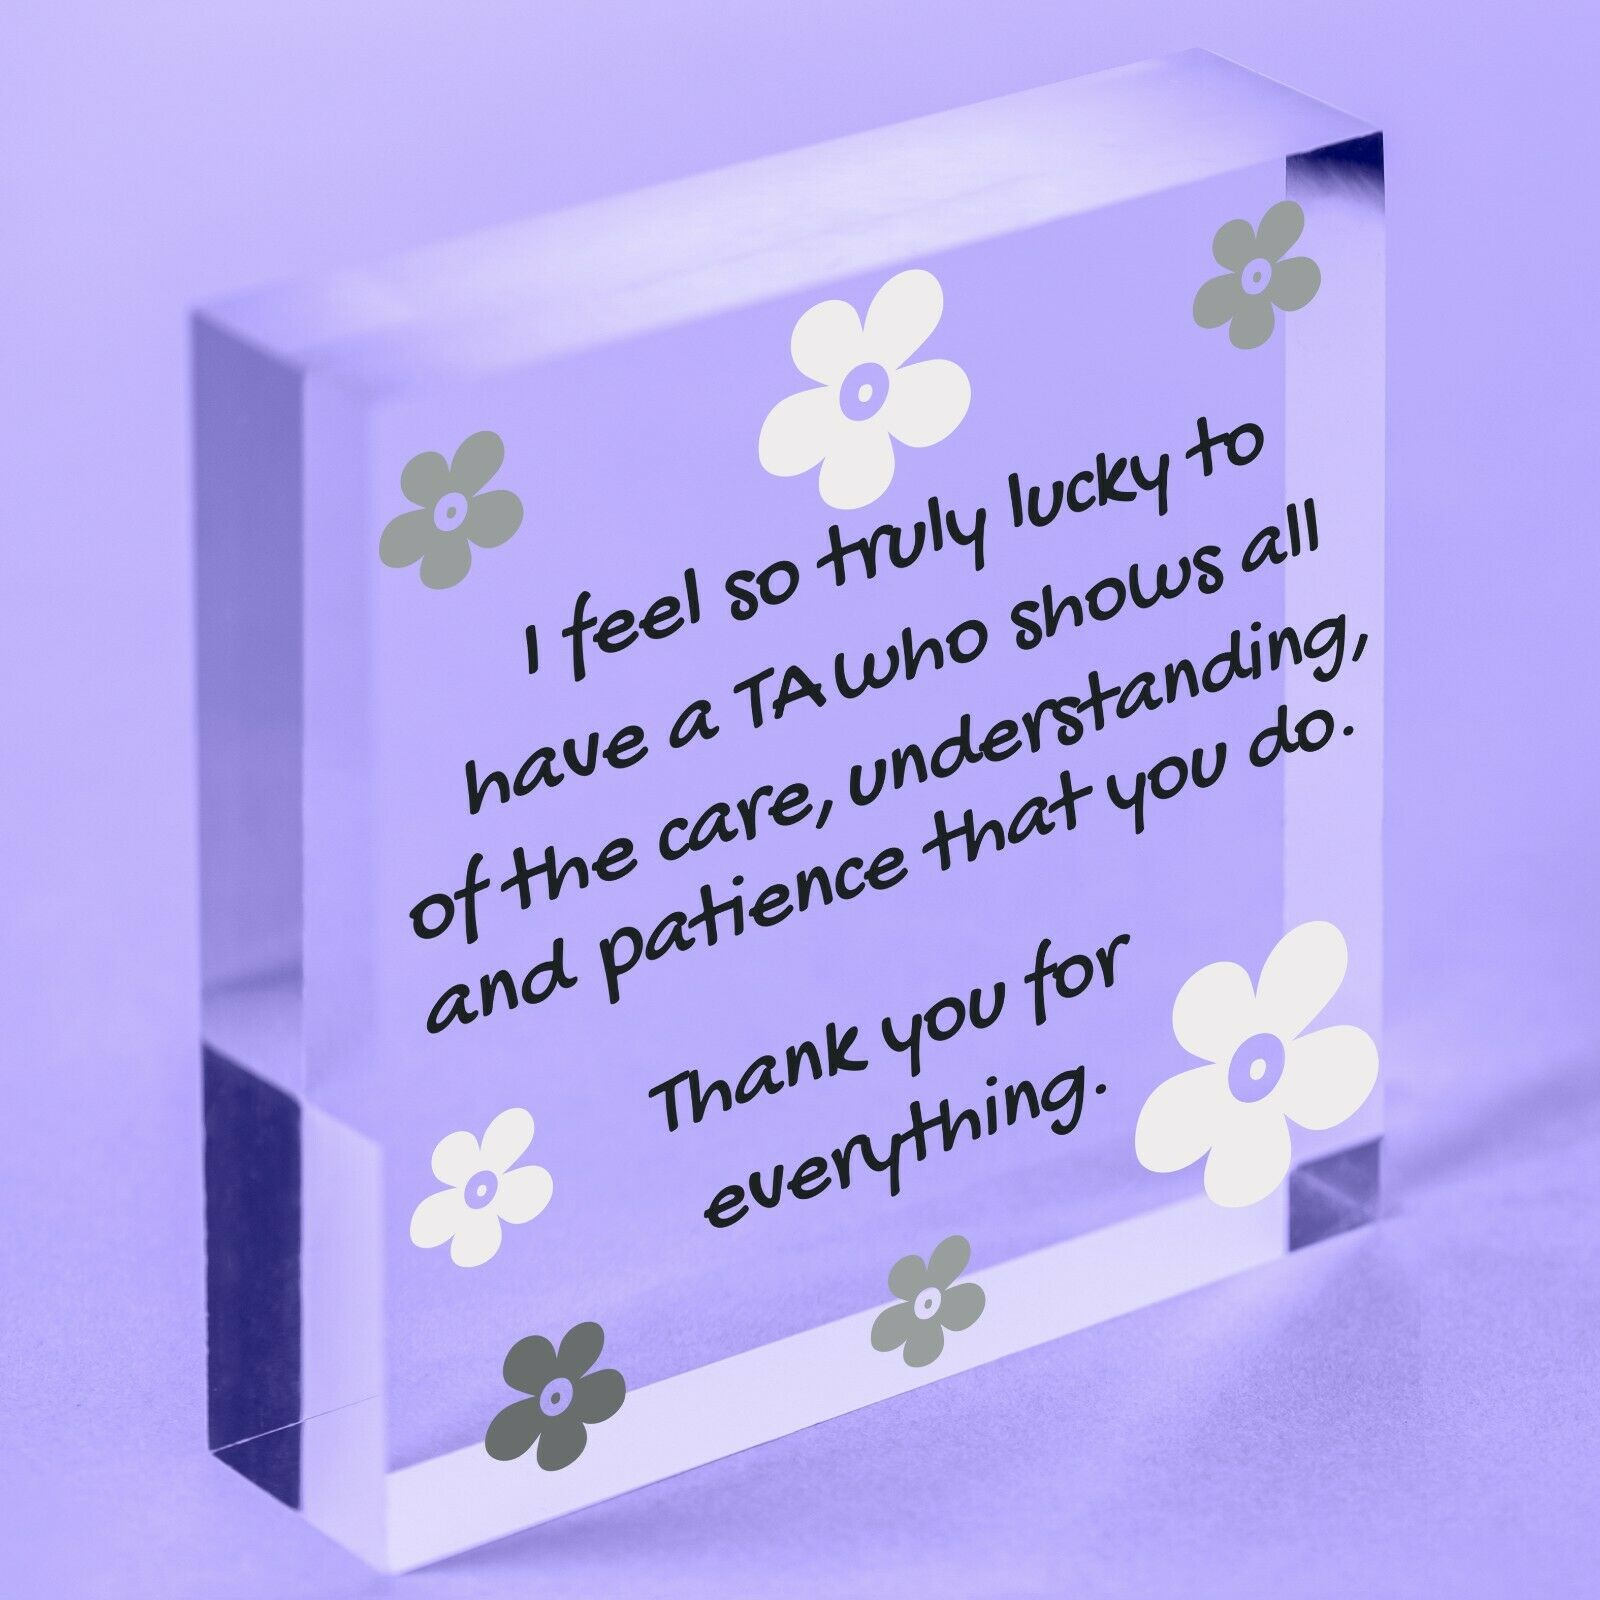 Amazing Teacher Teaching Assistant Leaving Gift Acrylic Plaque Thank You